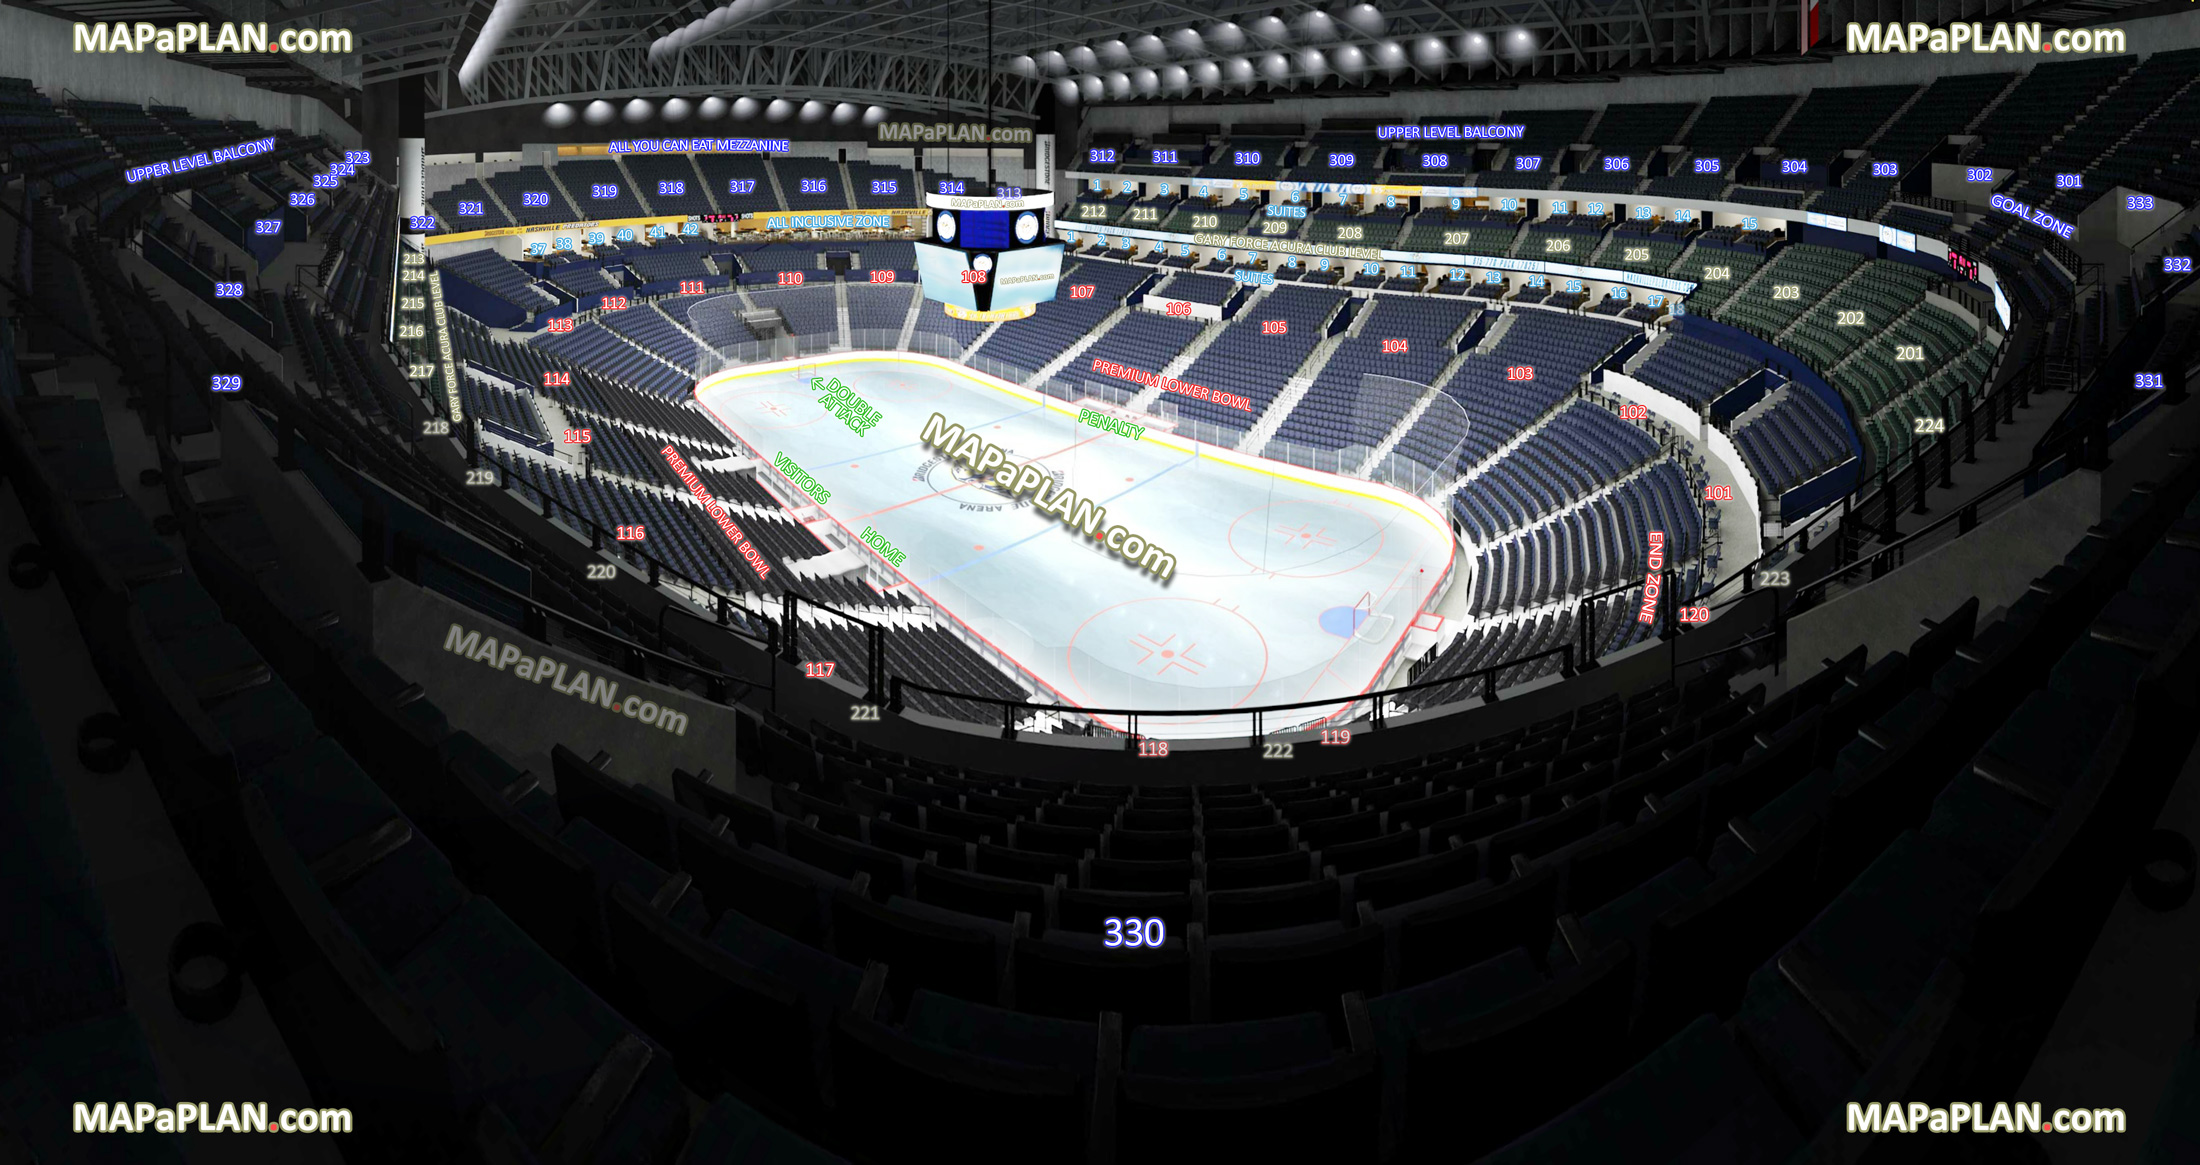 view section 330 row k seat 8 predators game photo premium twice end lower bowl 100 suite boxes sideline goal zone upper level balcony all you can eat mezzanine Nashville Bridgestone Arena seating chart